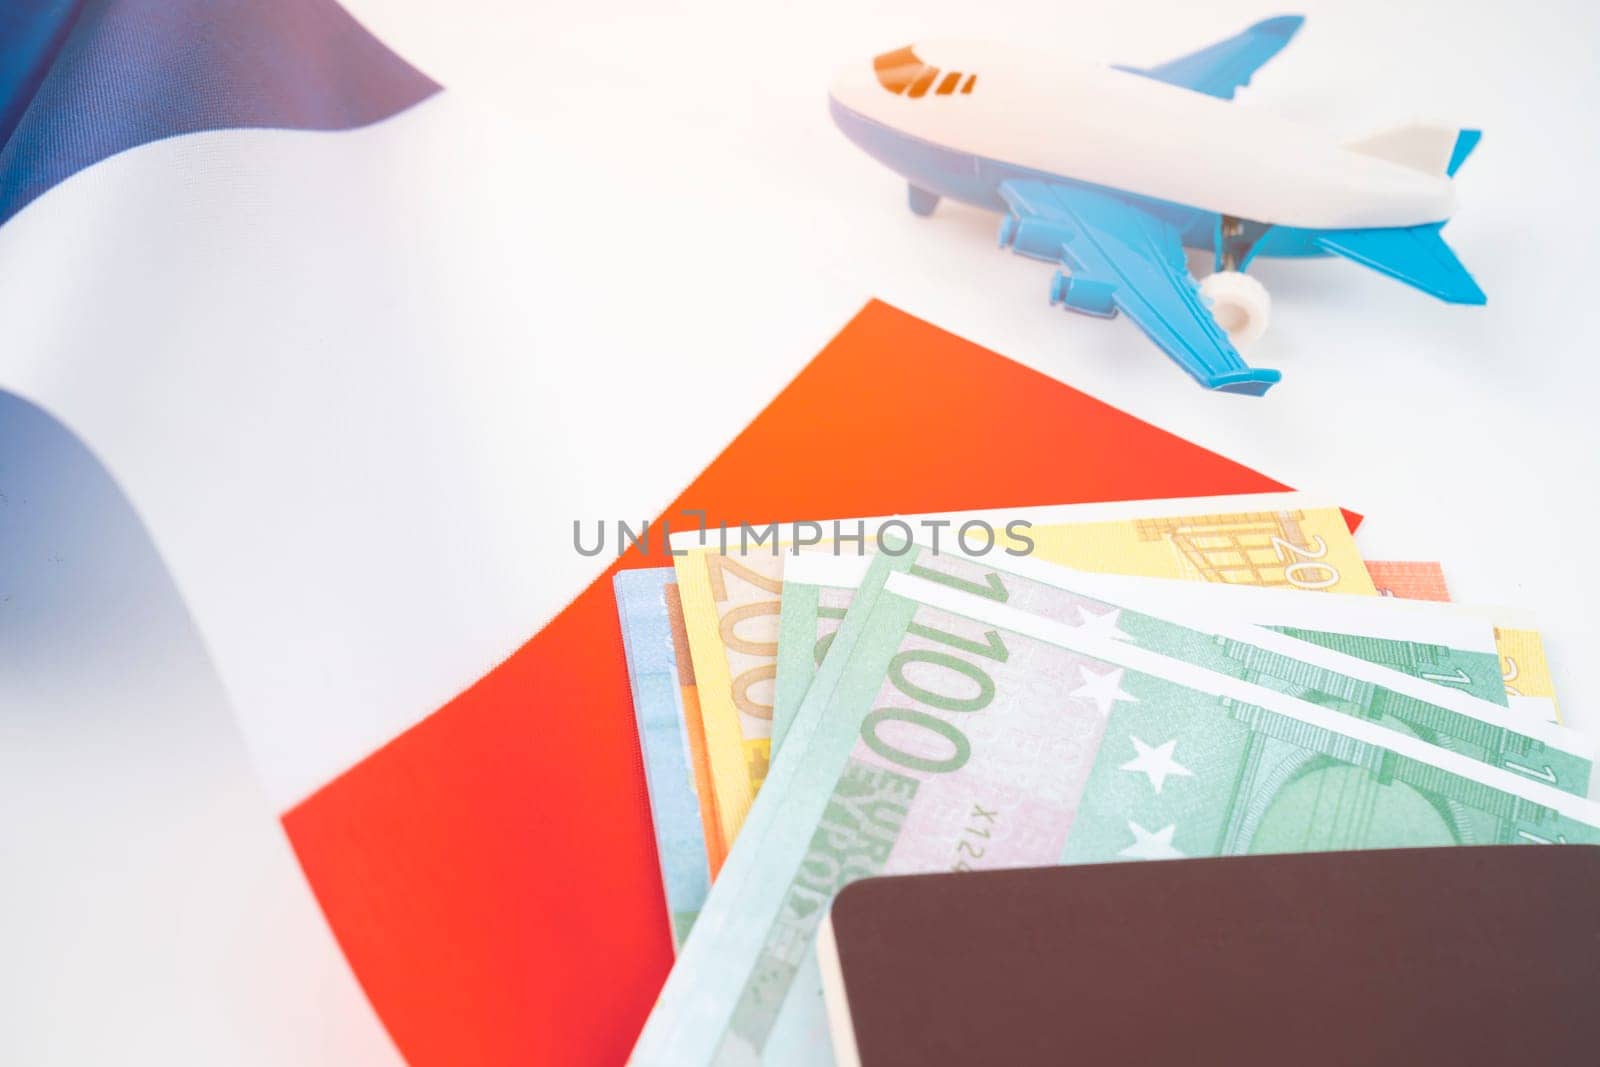 The Euro banknotes and passport on France flag with airplane toy. Travel planning concept . by Gamjai